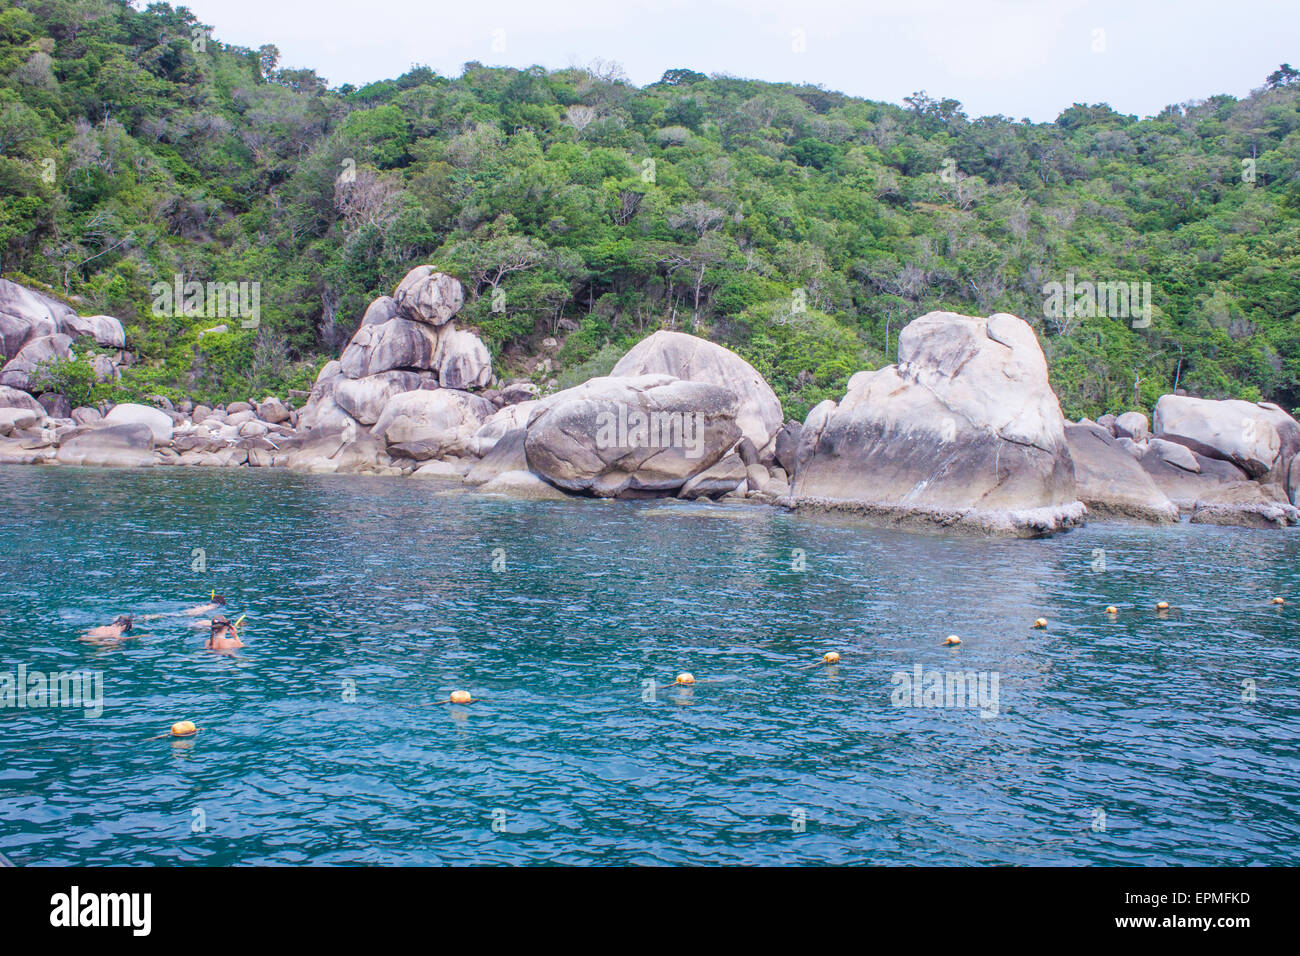 Snorkling at a bay in koh tao, thailand Stock Photo